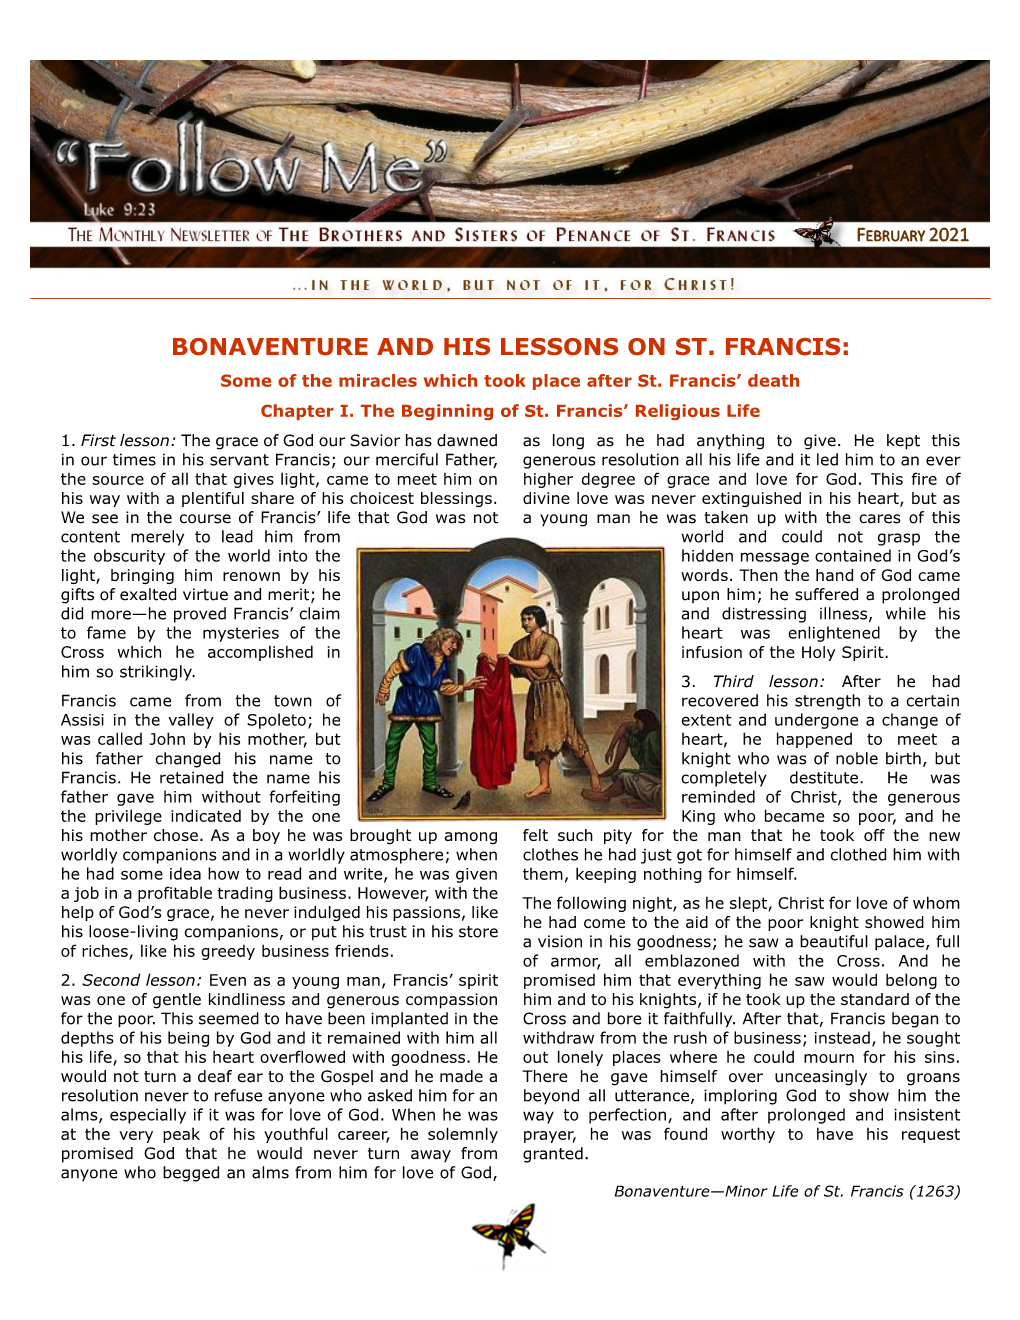 Bonaventure and His Lessons on St